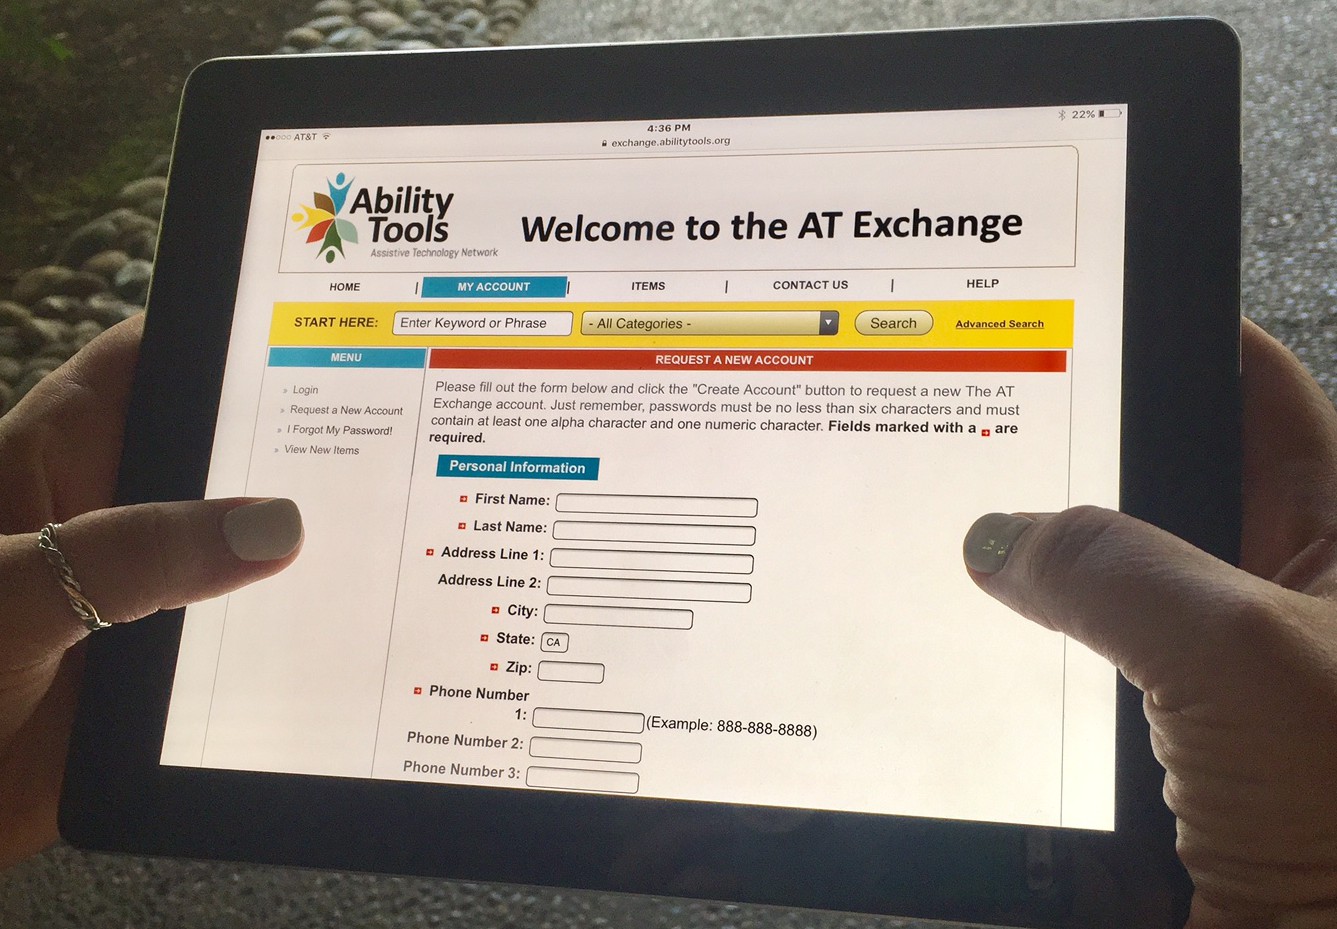 hands holding up an ipad displaying the "AT Exchange new account" page 